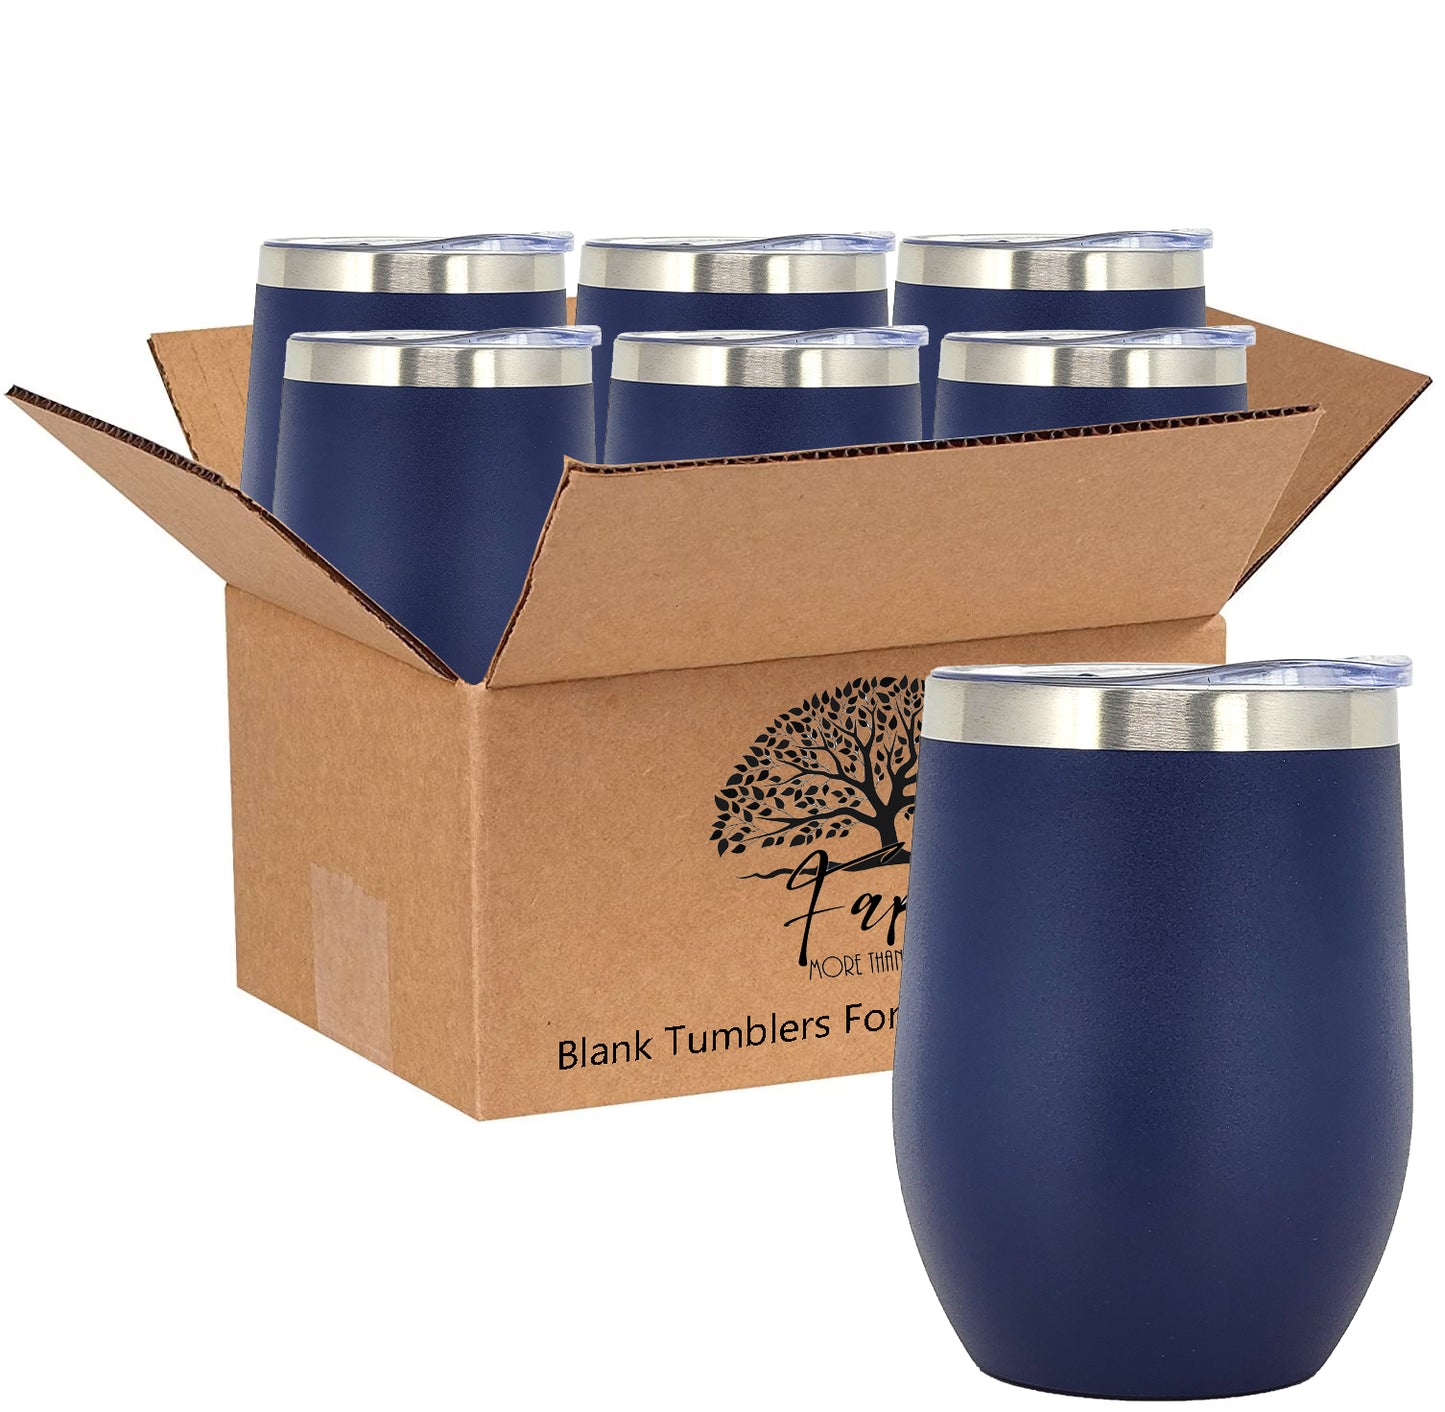 In BULK - Stainless Steel 12 Oz Wine Tumbler With Slider Block Lid -Powder Coating- 304 Stainless Steel Double Wall Insulated (6 Pack)